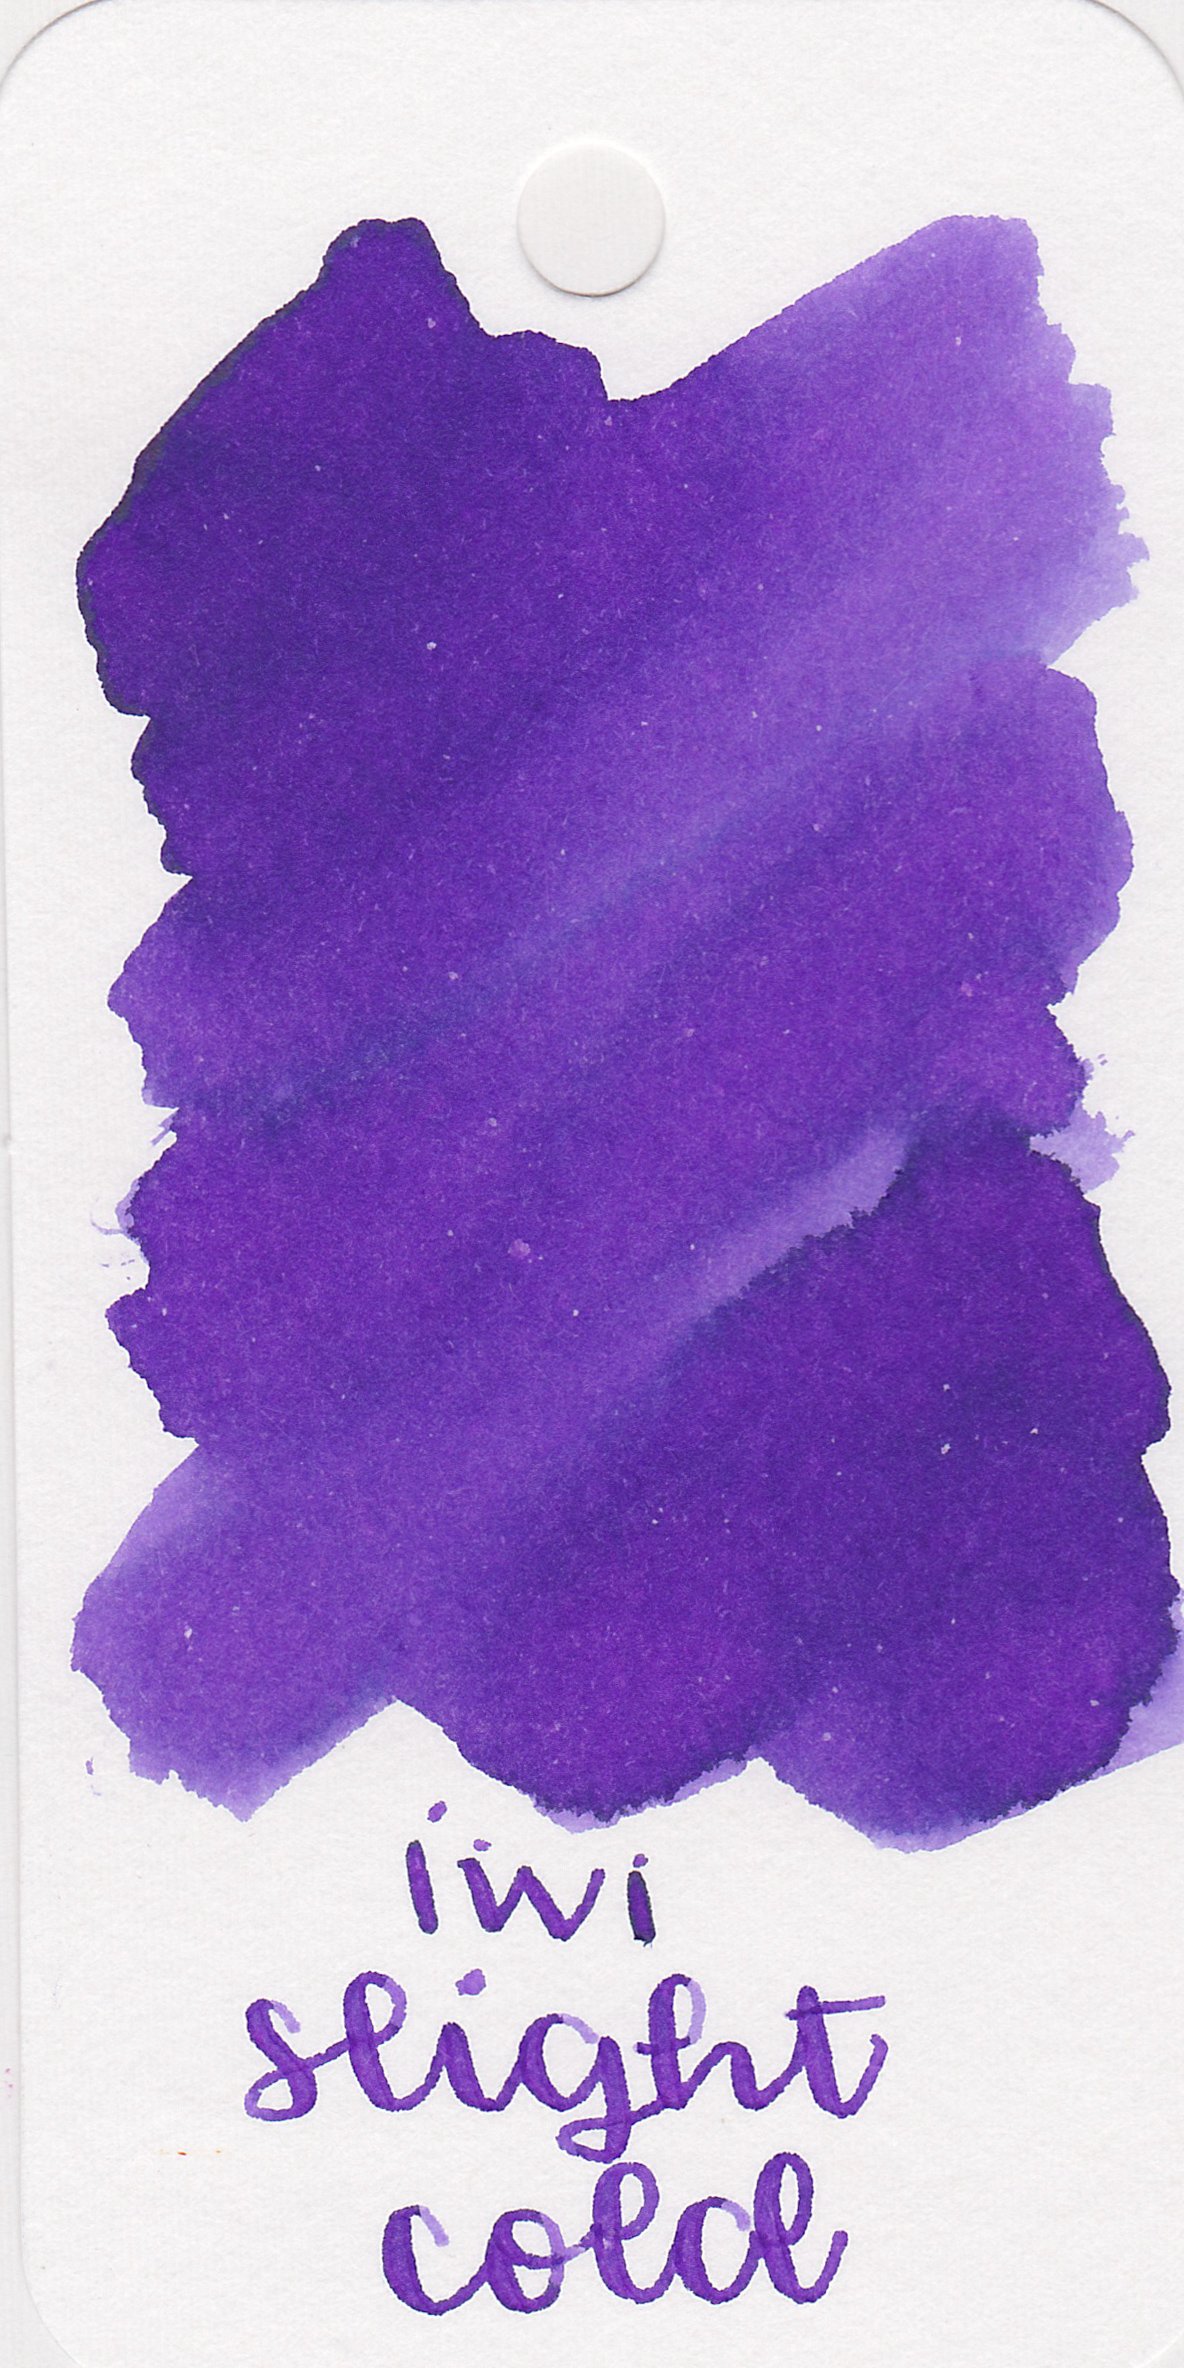 Ink Review #1786: IWI Slight Cold — Mountain of Ink